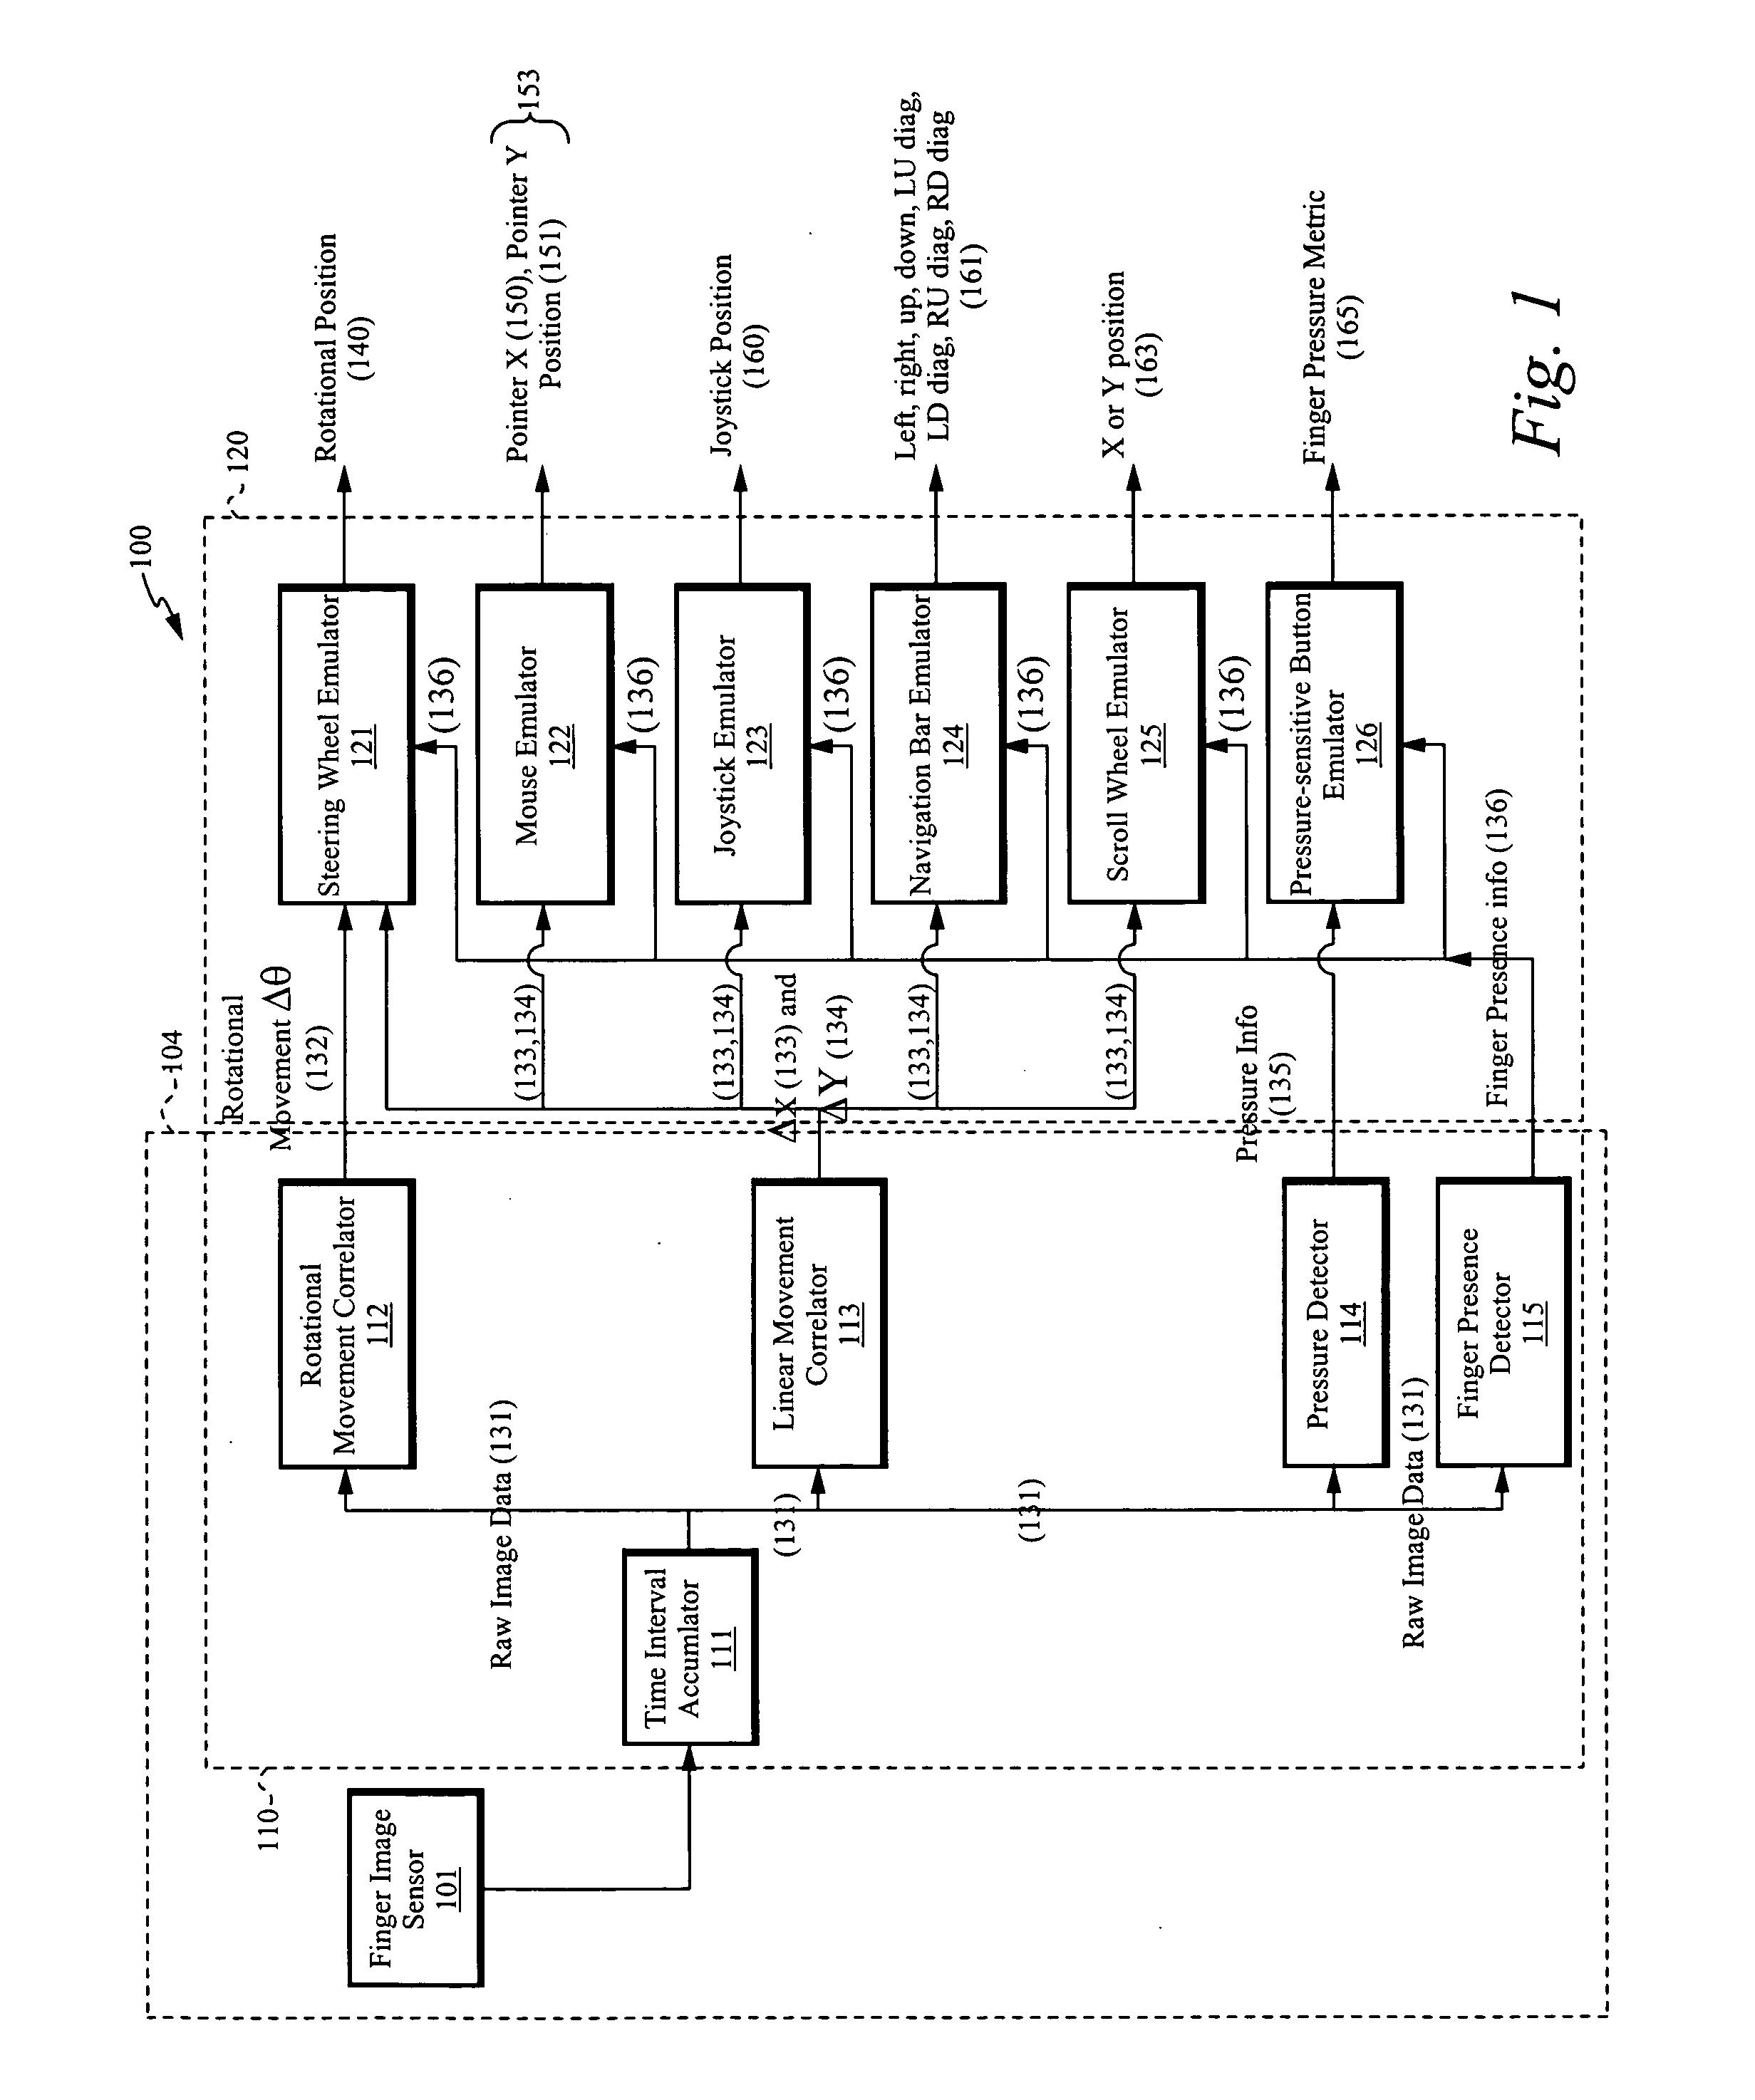 System and method for a miniature user input device